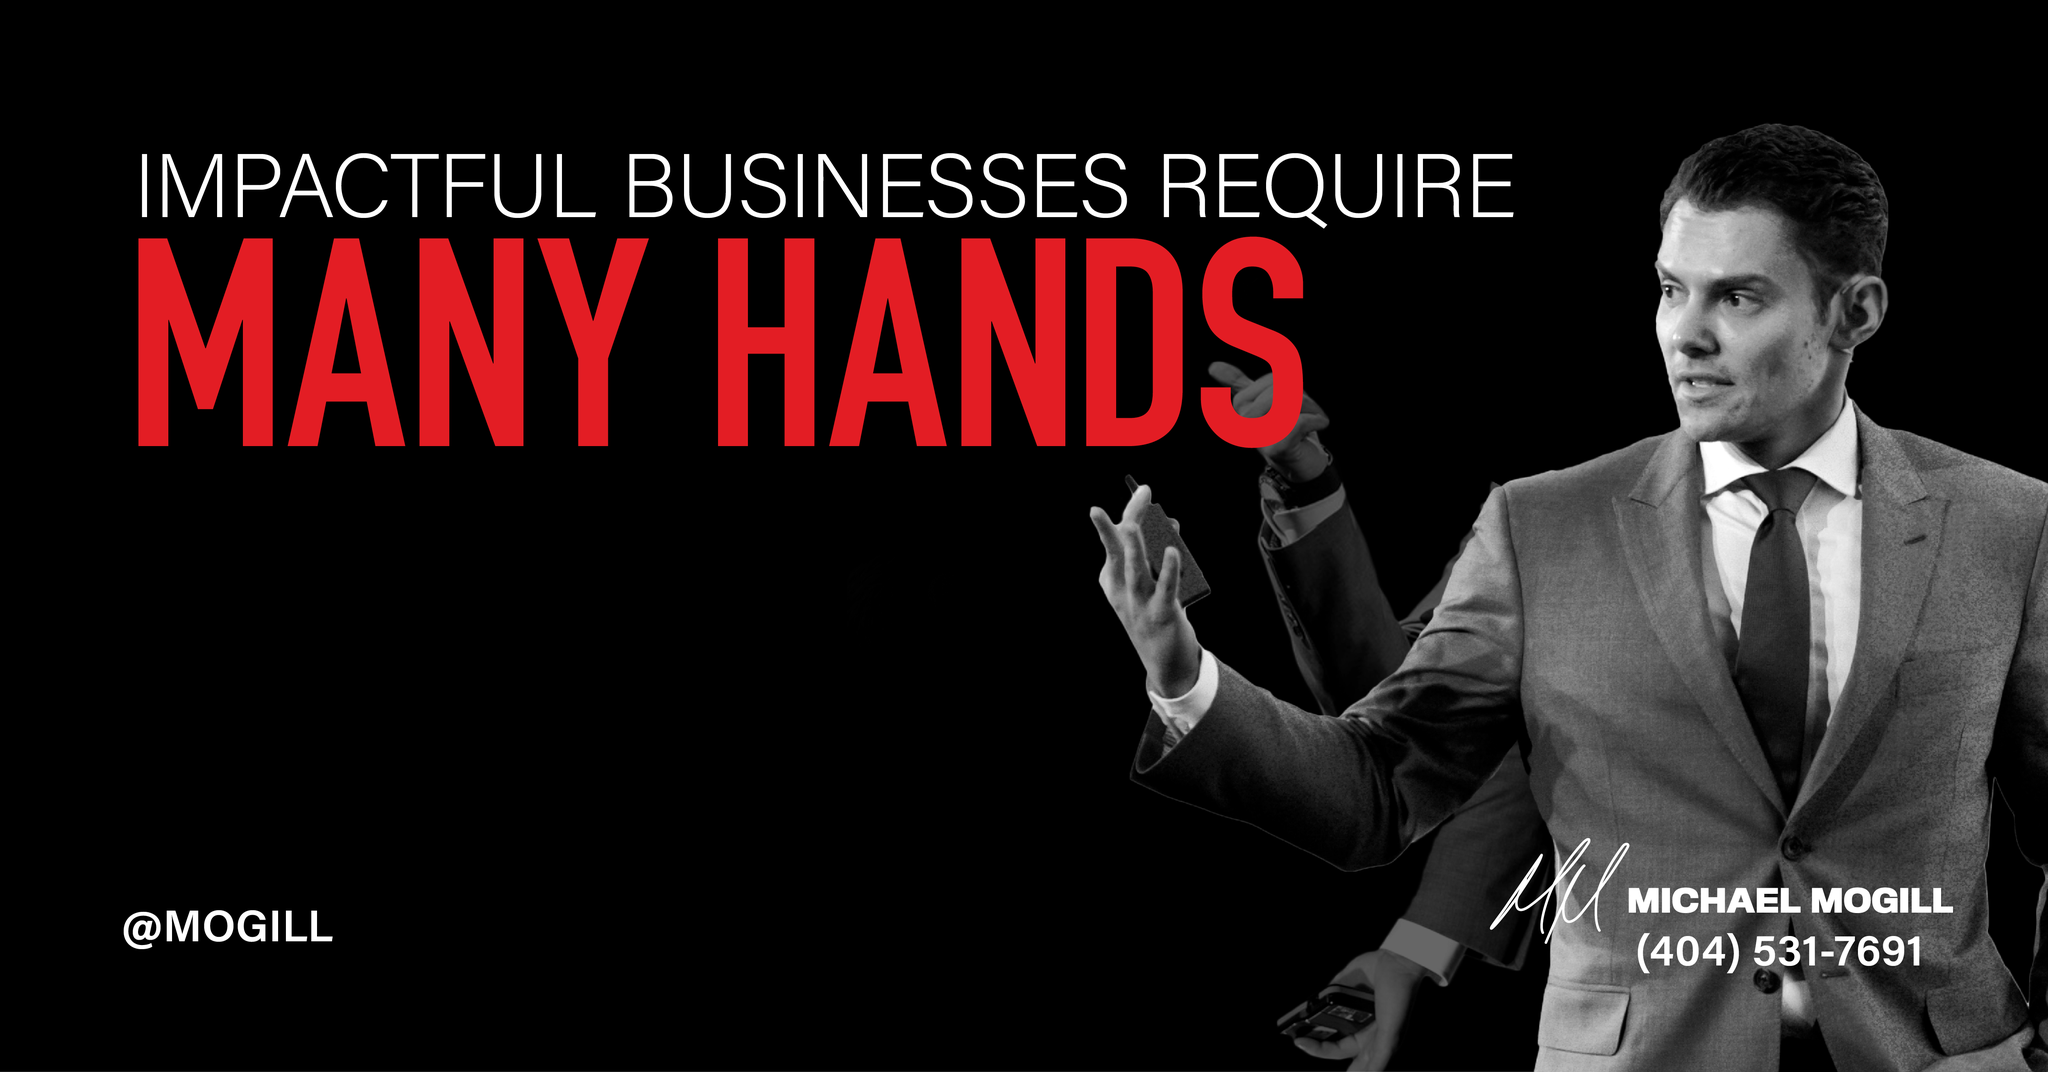 Impactful Businesses Require Many Hands